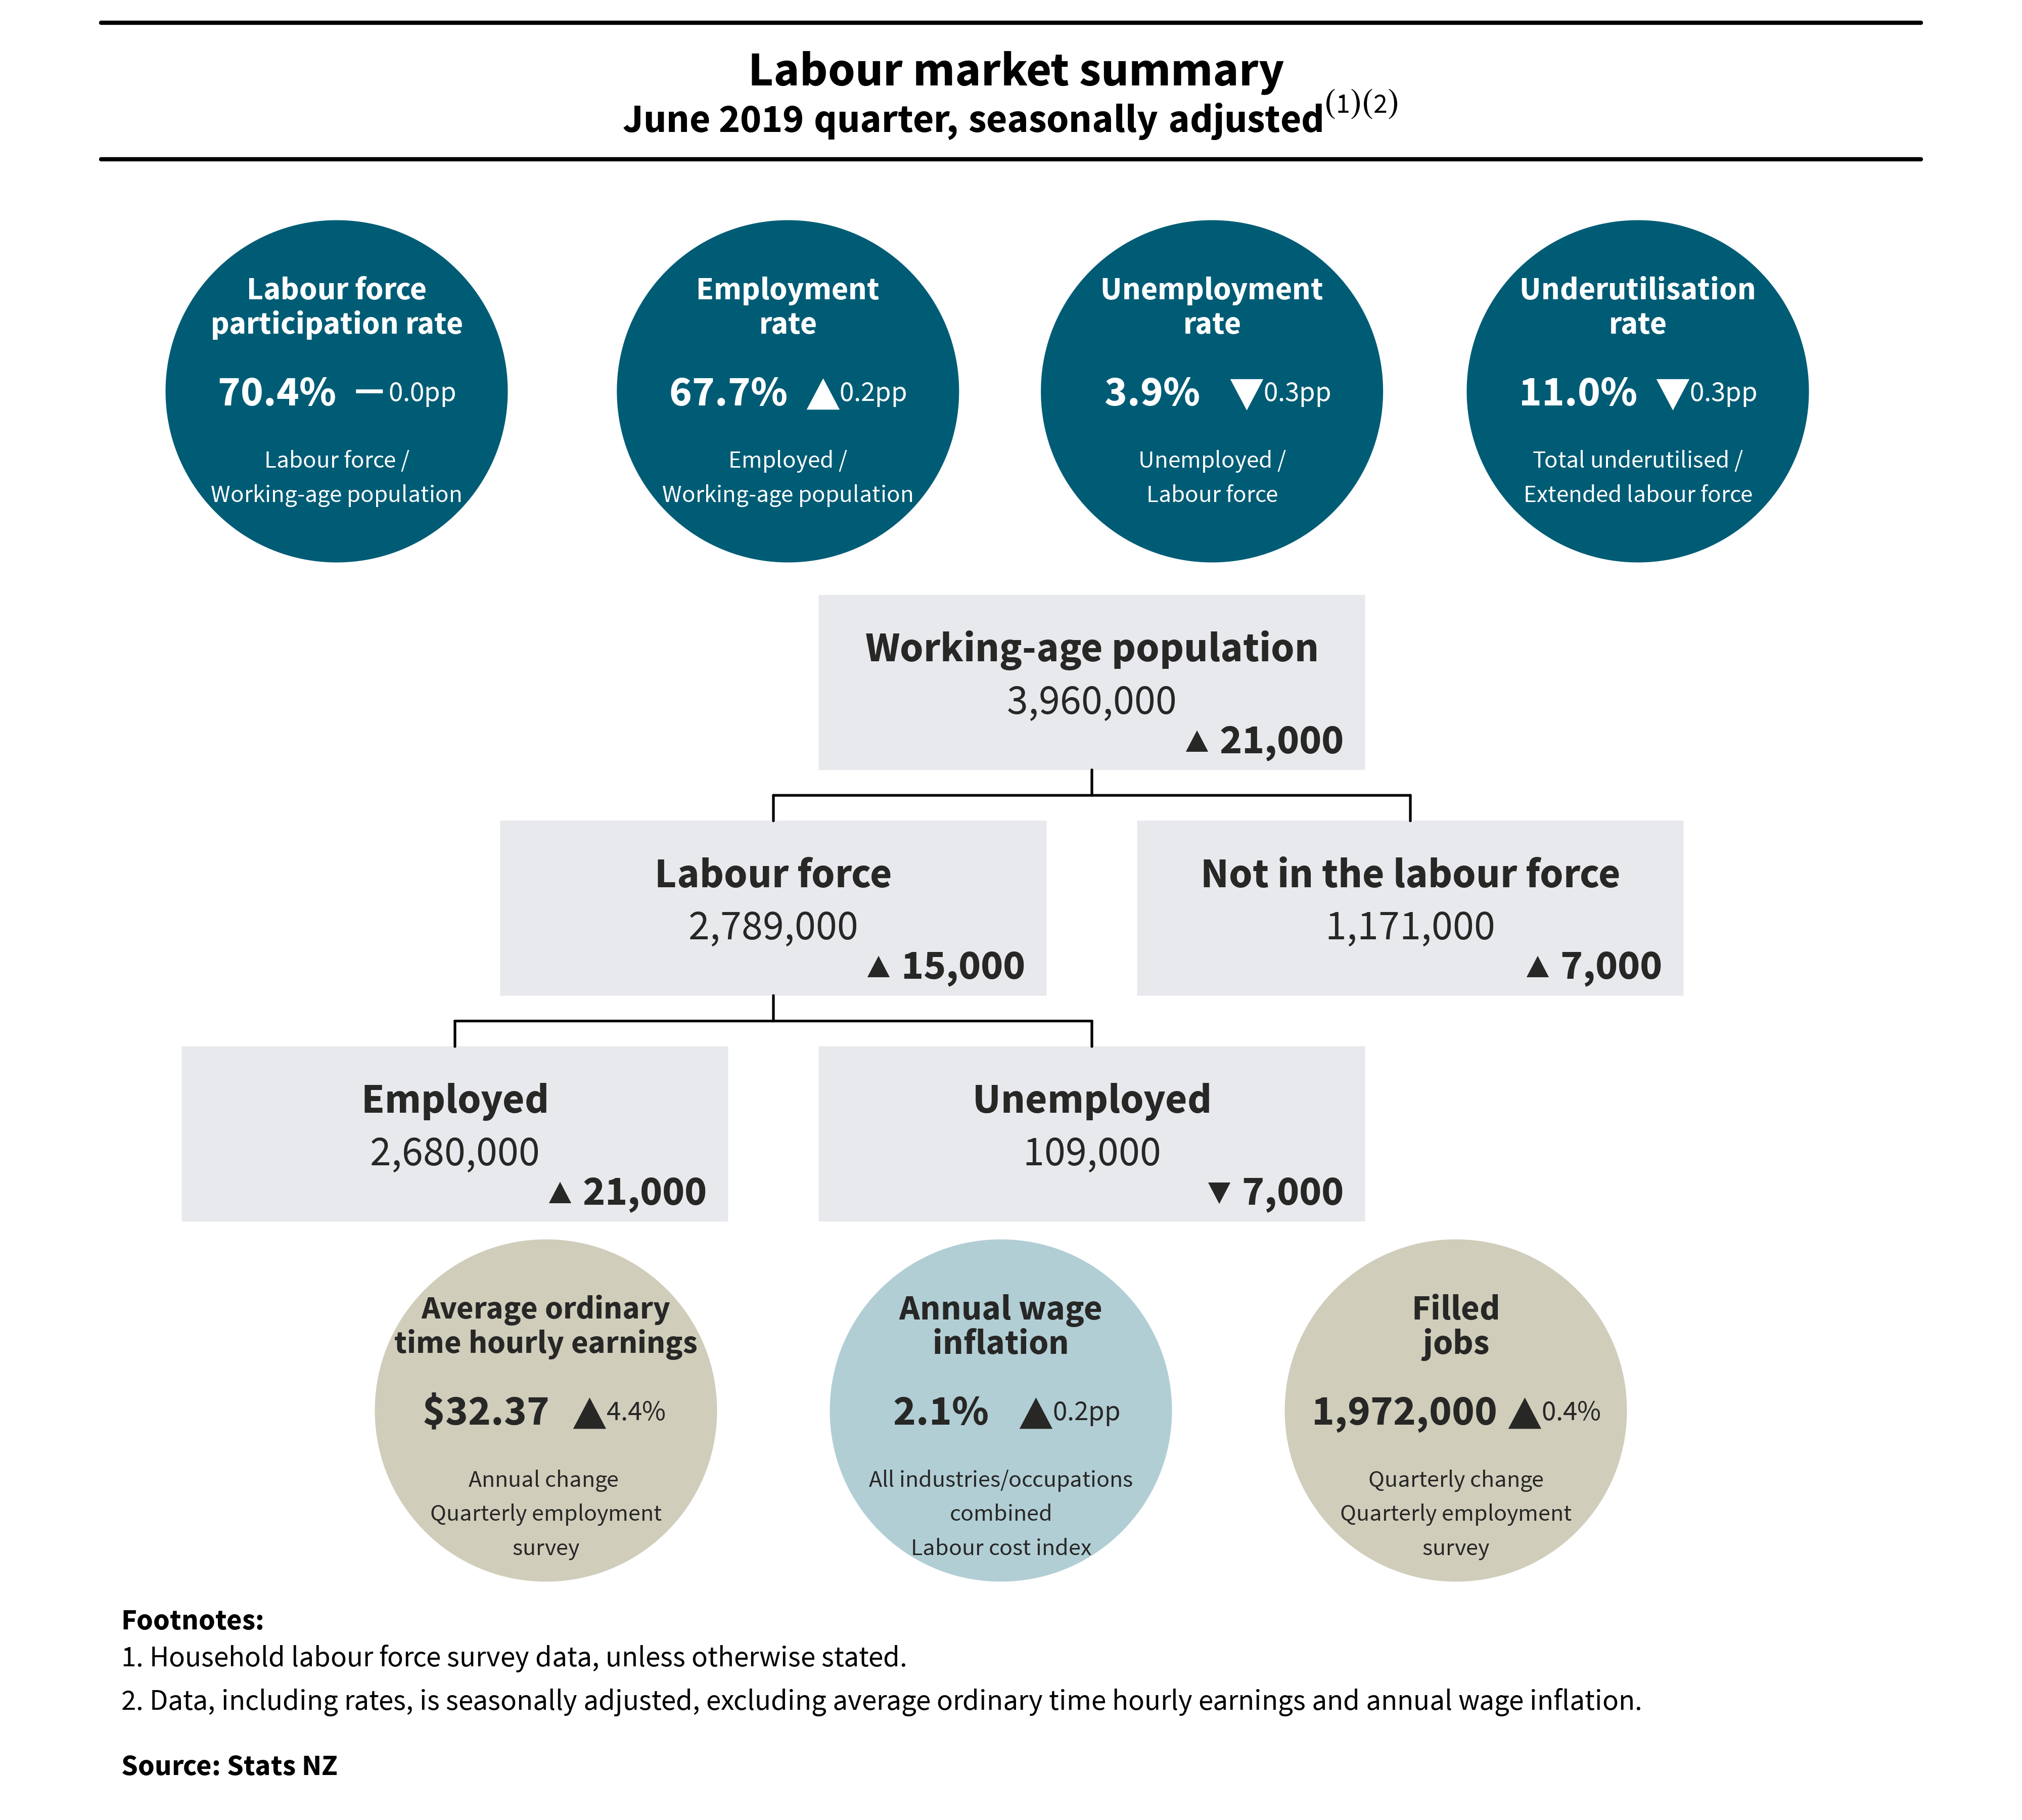 Diagram shows labour market summary for June 2019 quarter - full text alternative available below